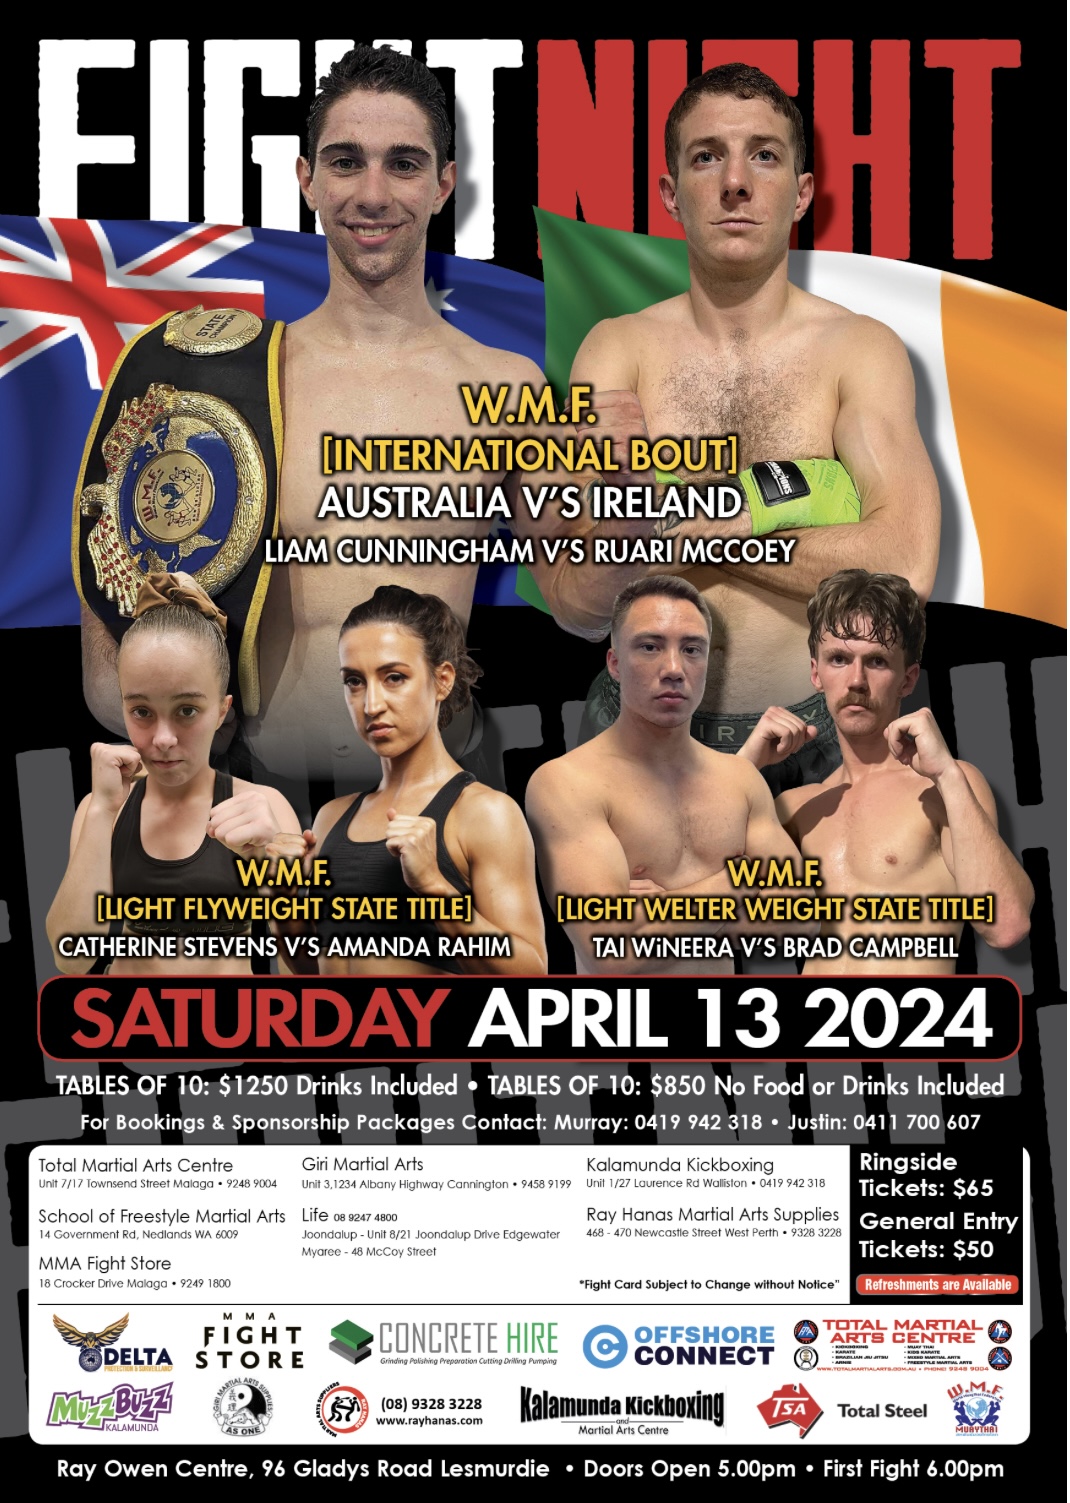 Poster with 6 WMF fighters/athletes. Text reads WMF International Bout, Australia V Ireland Saturday 13 April 2024